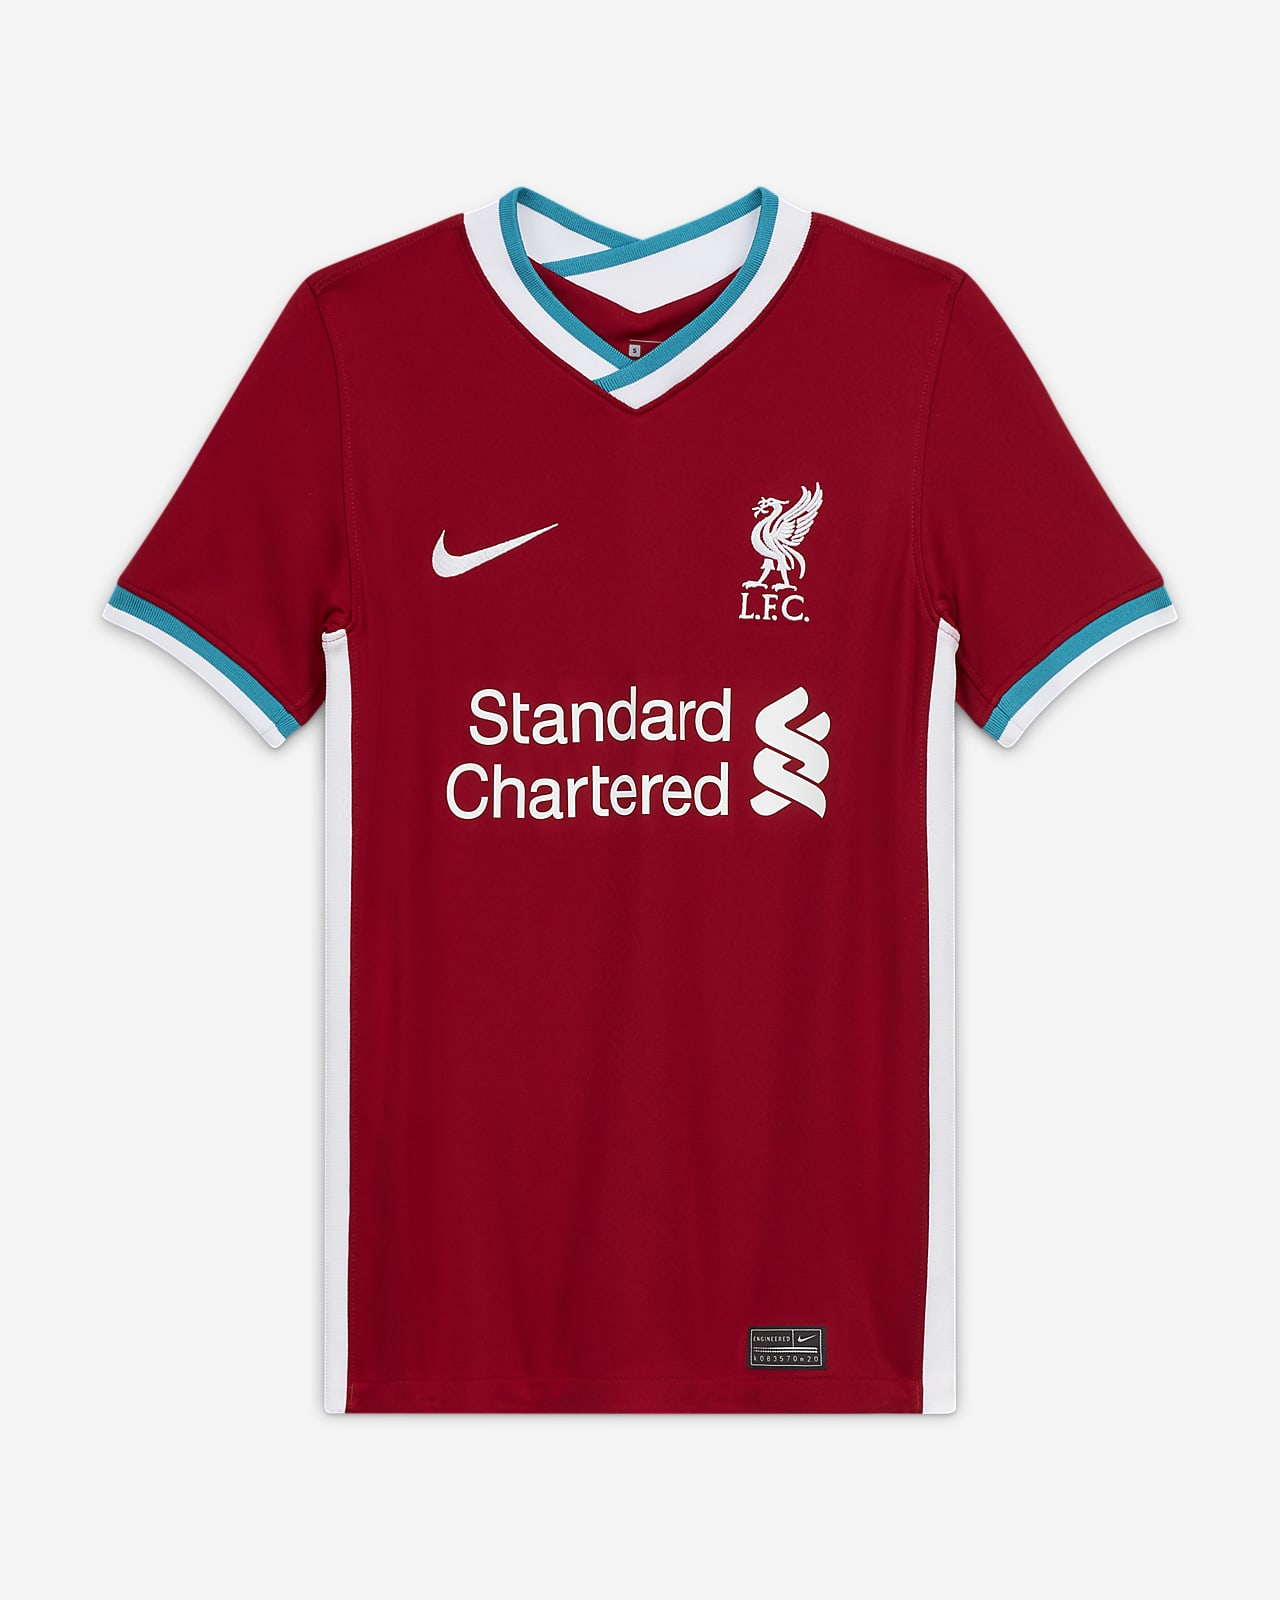 where can i get a liverpool jersey